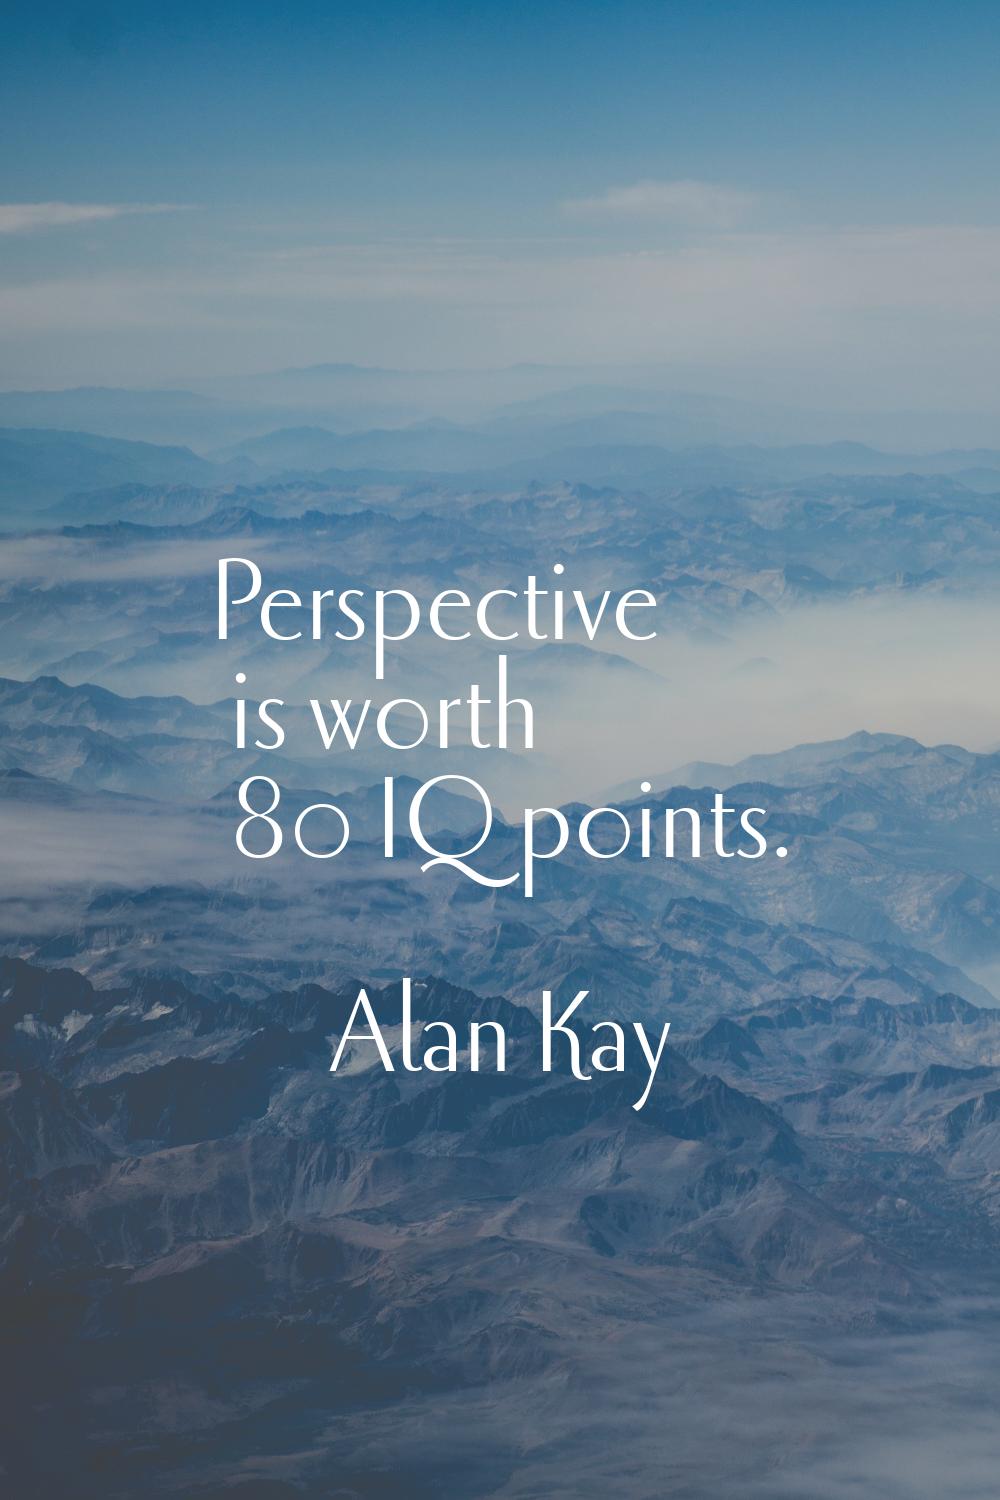 Perspective is worth 80 IQ points.